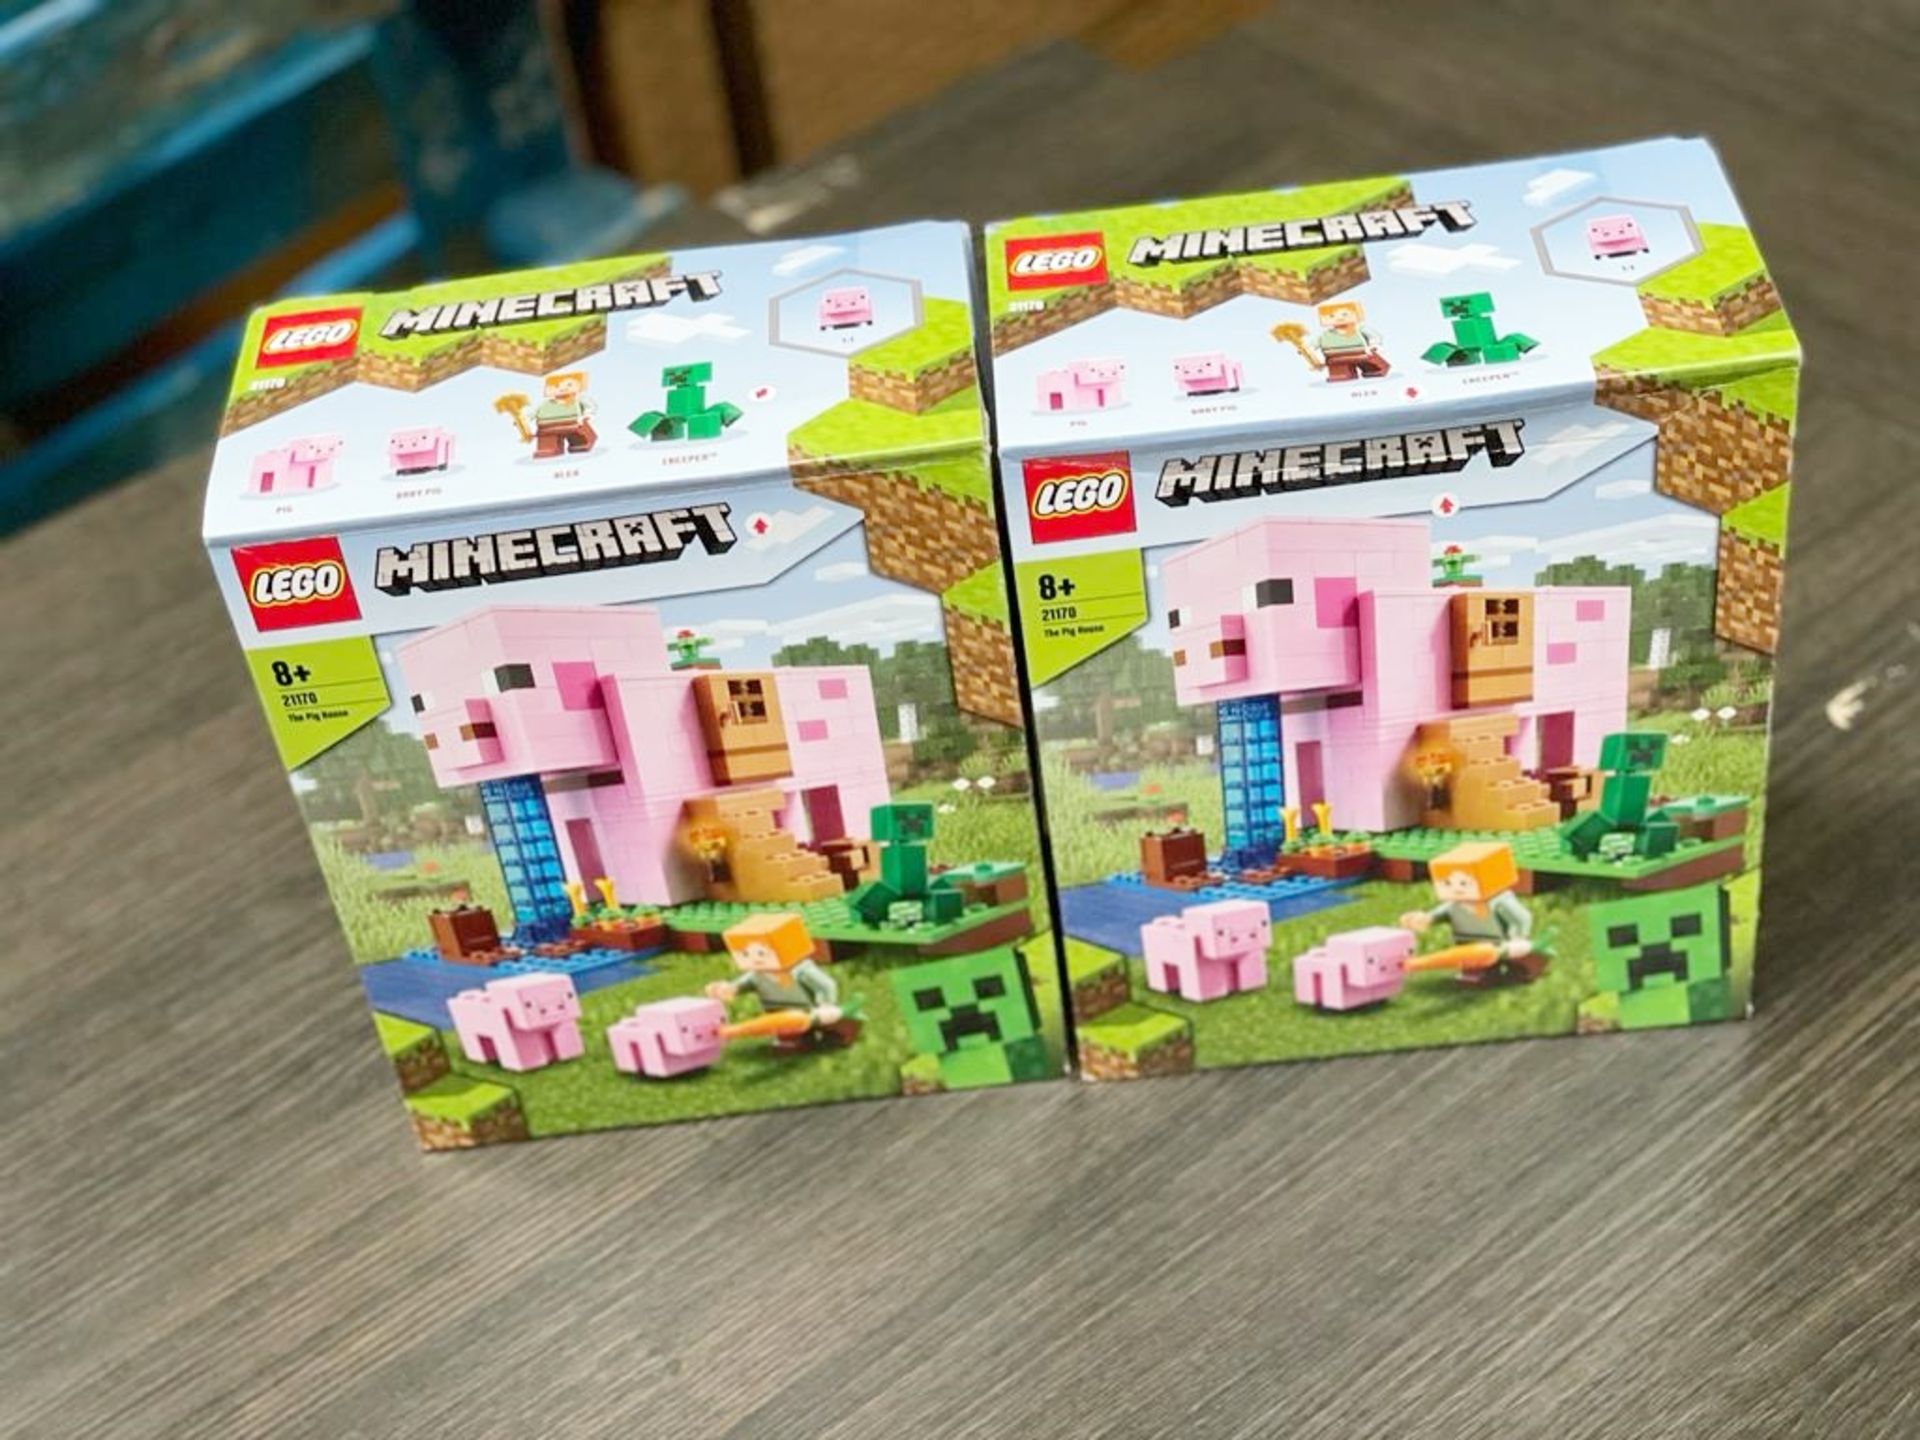 1 x Lego 21170 Minecraft The Pig House Building Set 21170 - Brand New - CL011 - Ref: HRX123  - - Image 3 of 4